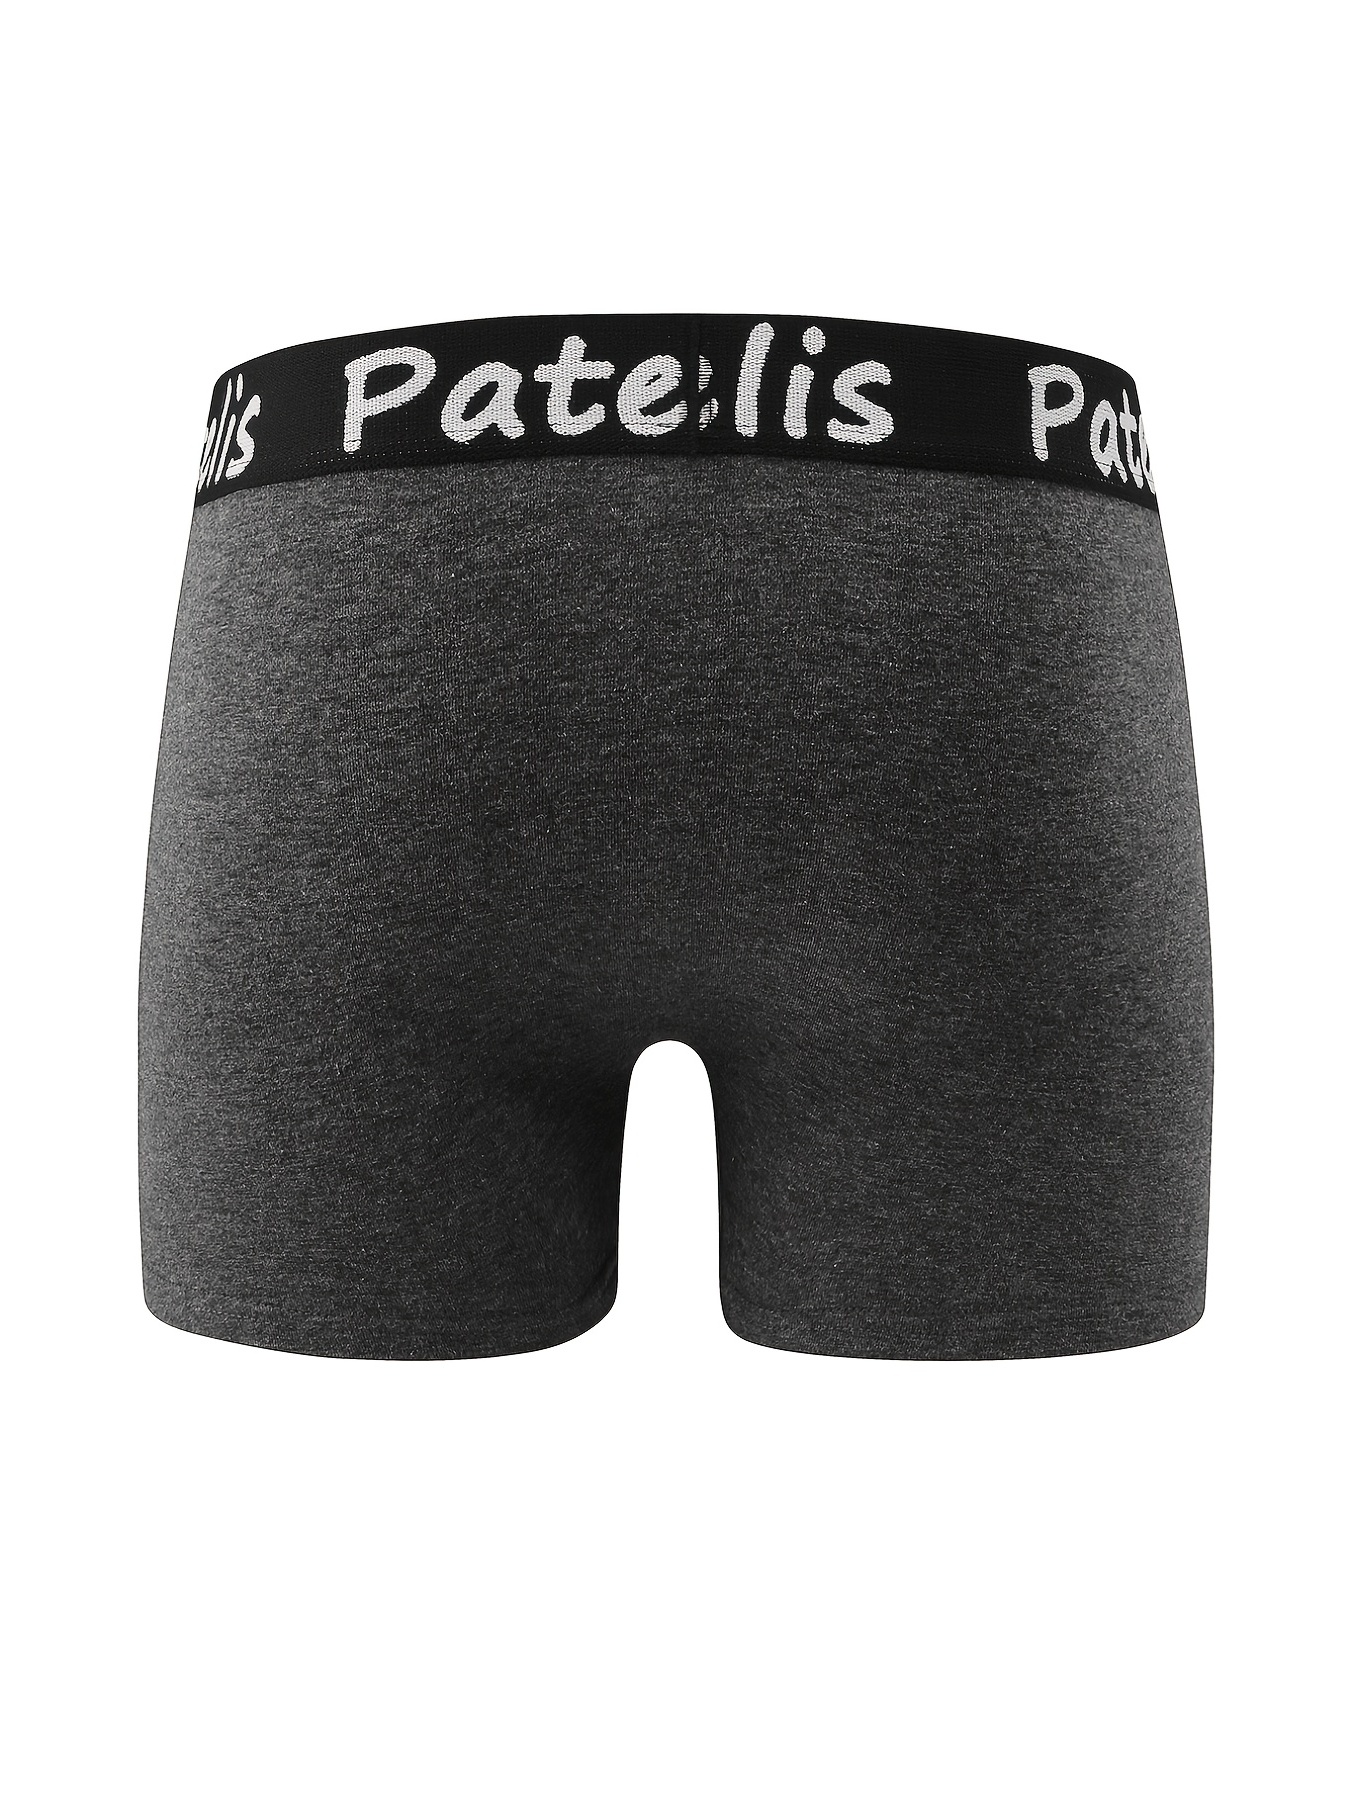 Panties Underwear 95%Cotton Black NO Accessories Included Trunks Boxer